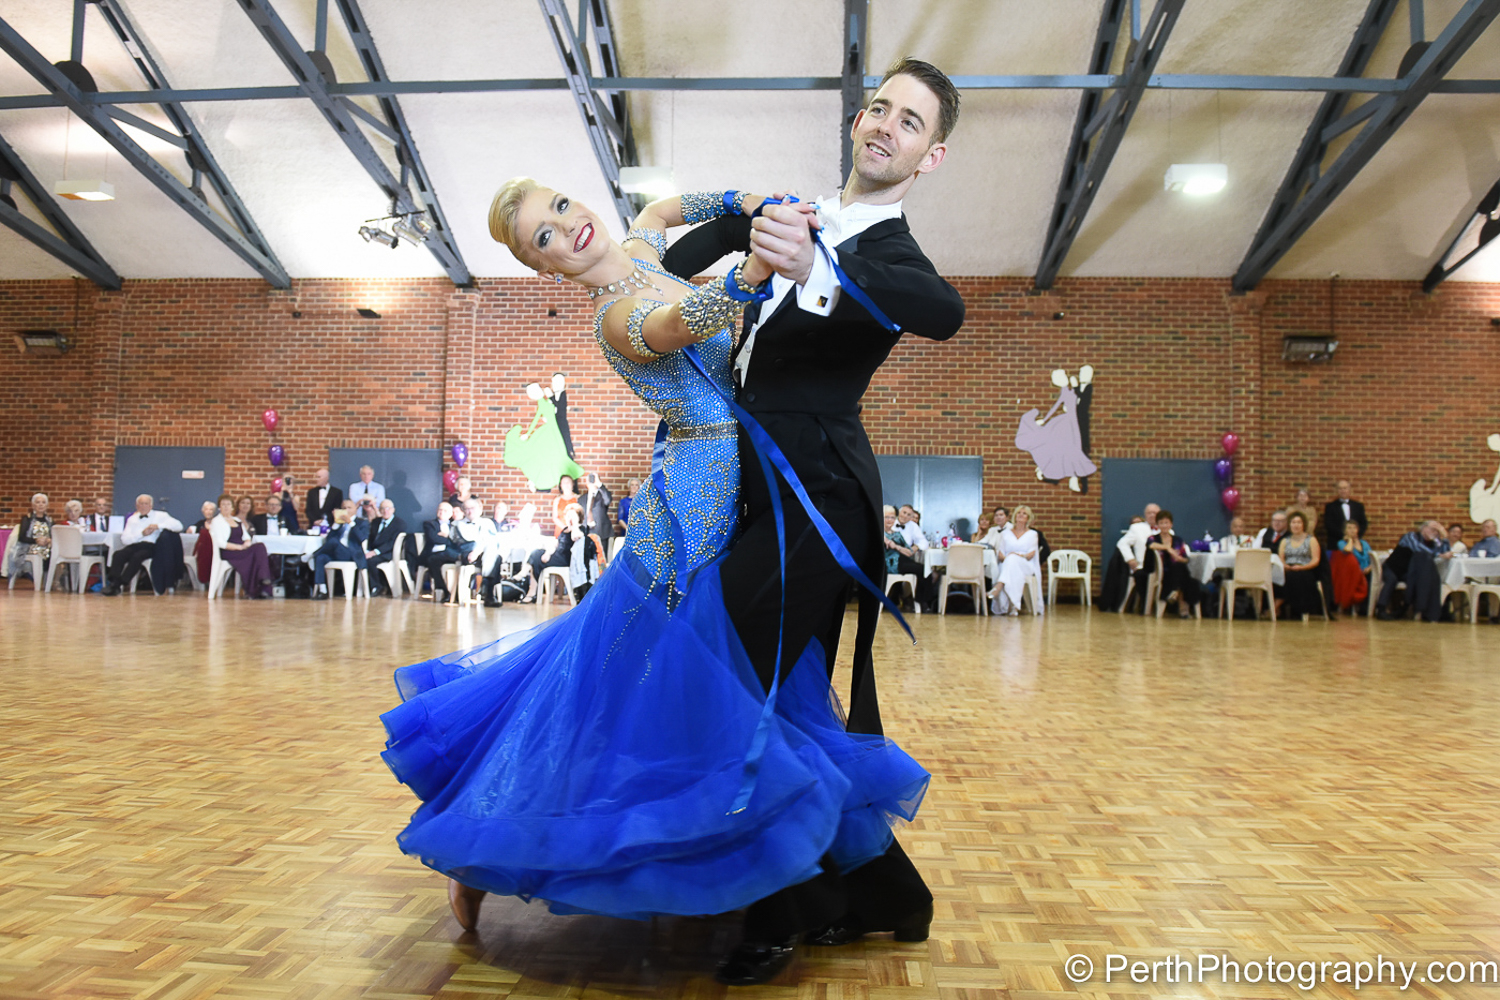 Perth Photography | Event Photography